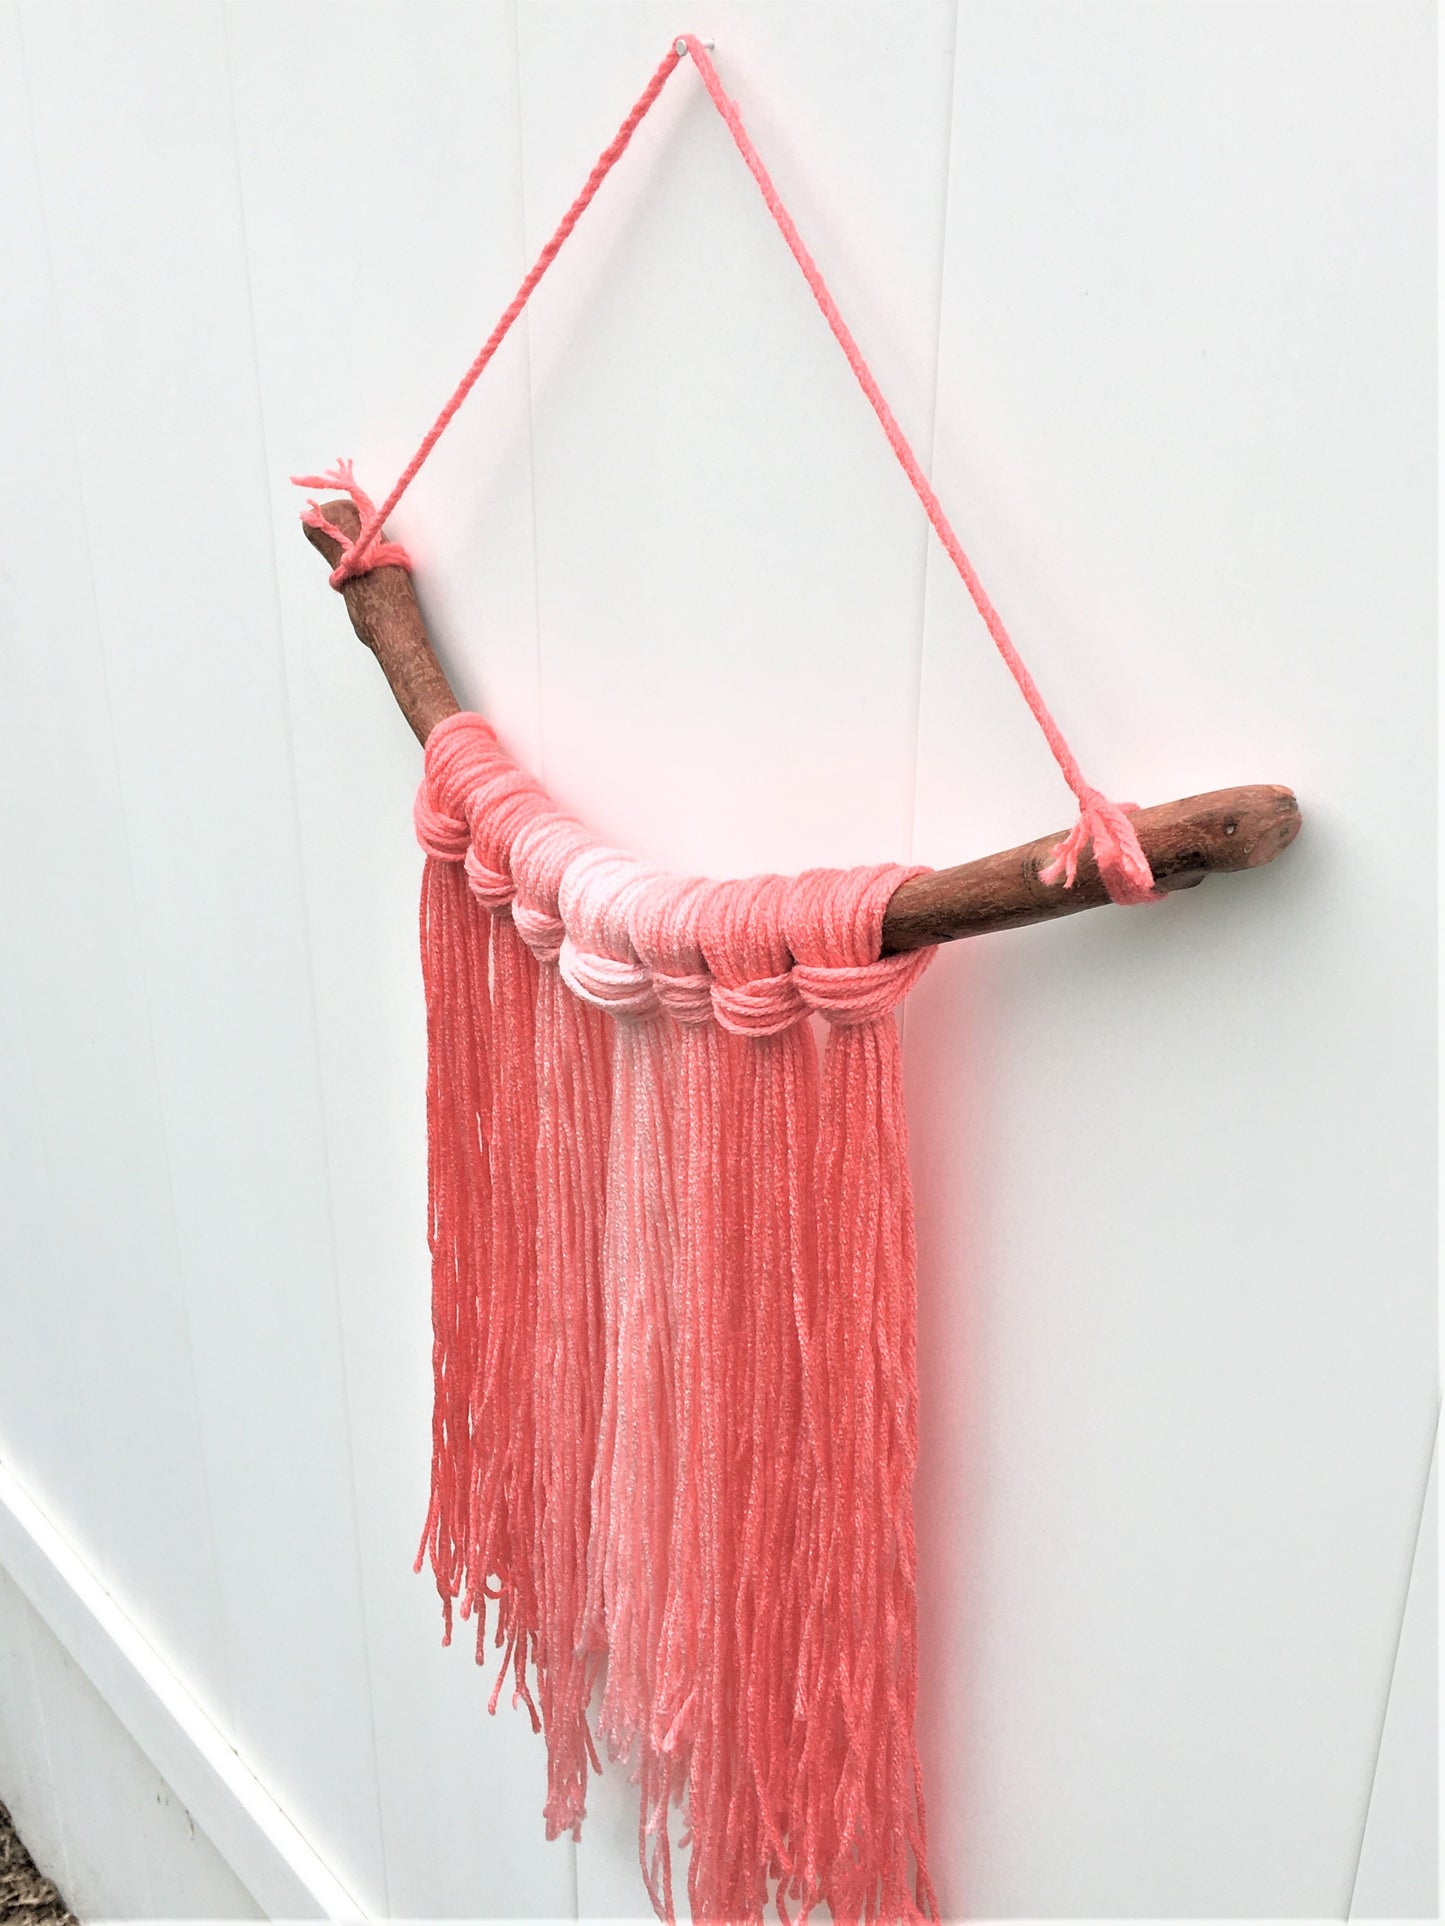 Yarn Wall hanging 1 - Chunky coral hombre (dark outside to light inside) w/live oak branch